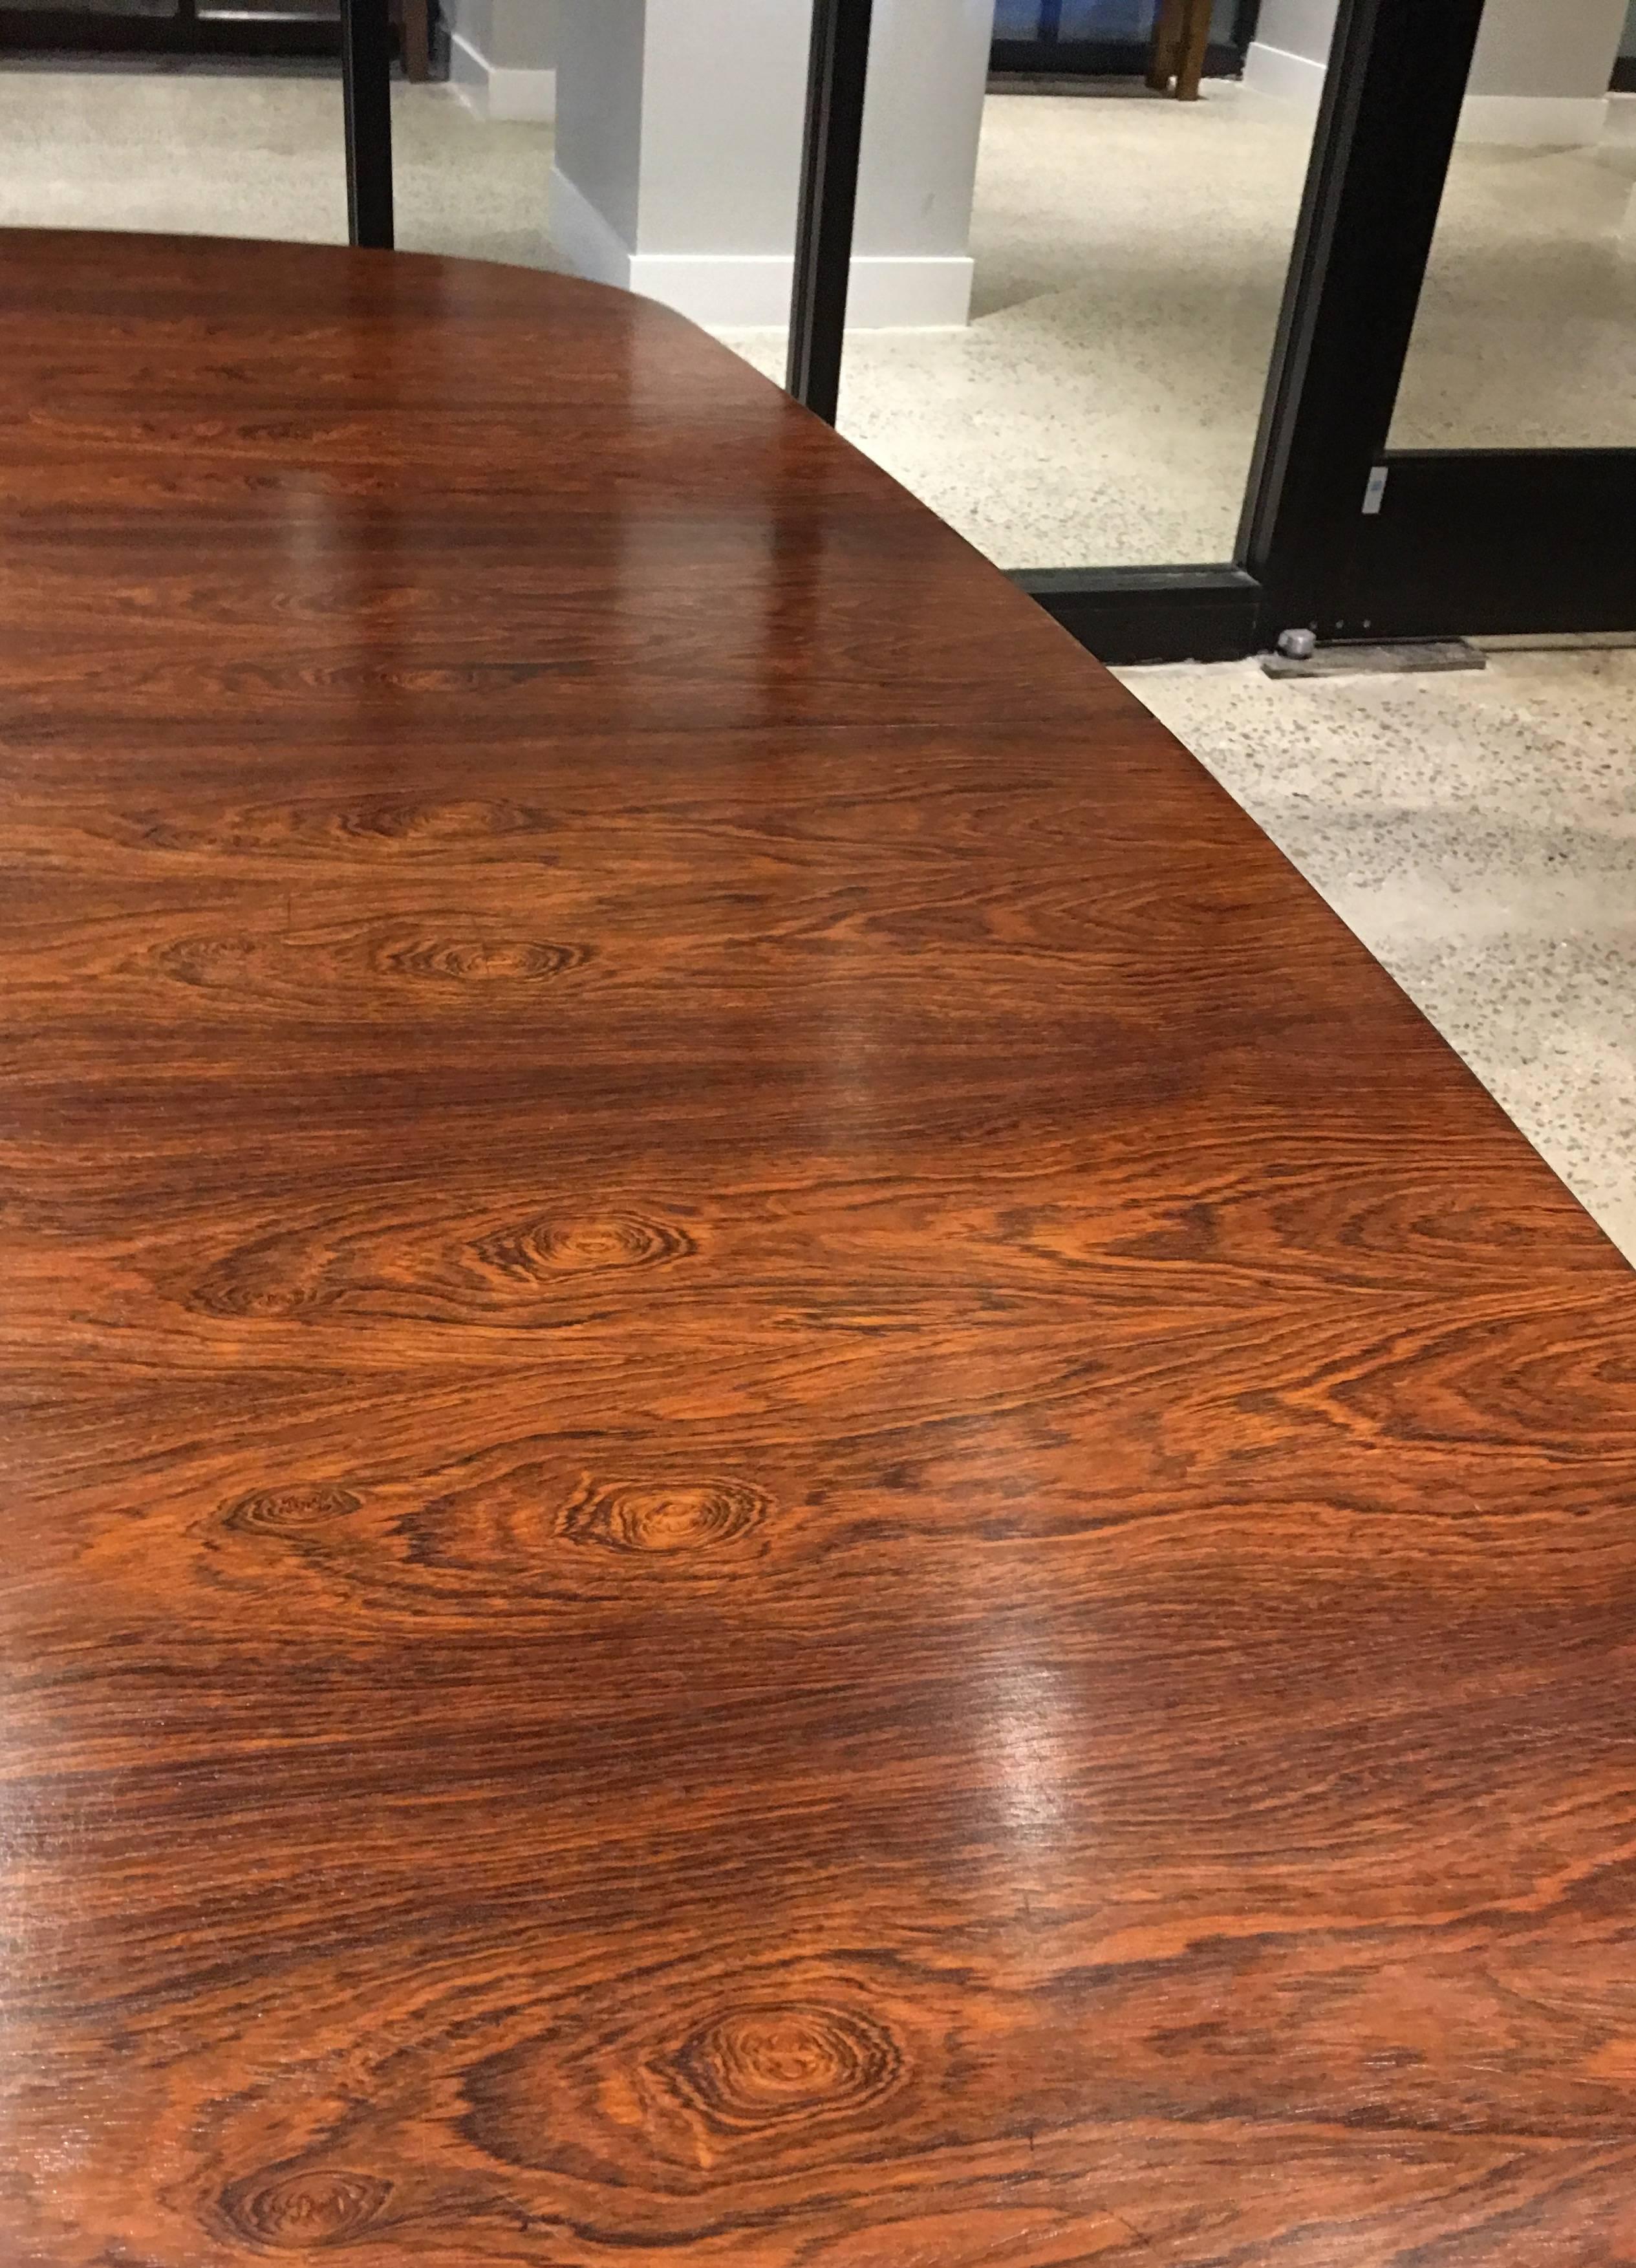 brazilian rosewood dining table